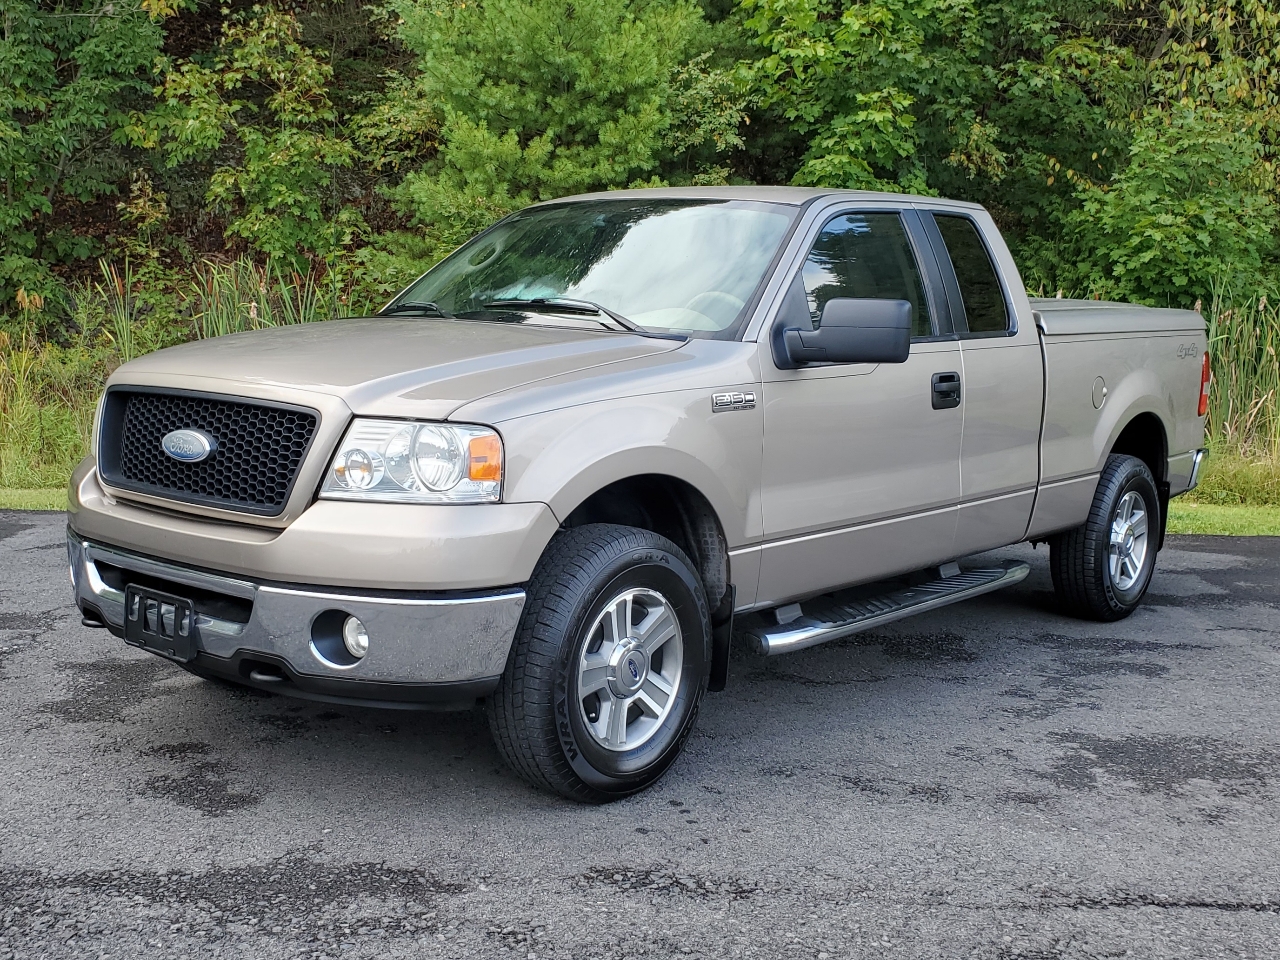 Used 2006 Ford F-150 FX4 SuperCab 5.5-ft Box for Sale in Pine Grove PA 2006 Ford F-150 Fx4 Supercab 5.5-ft Box